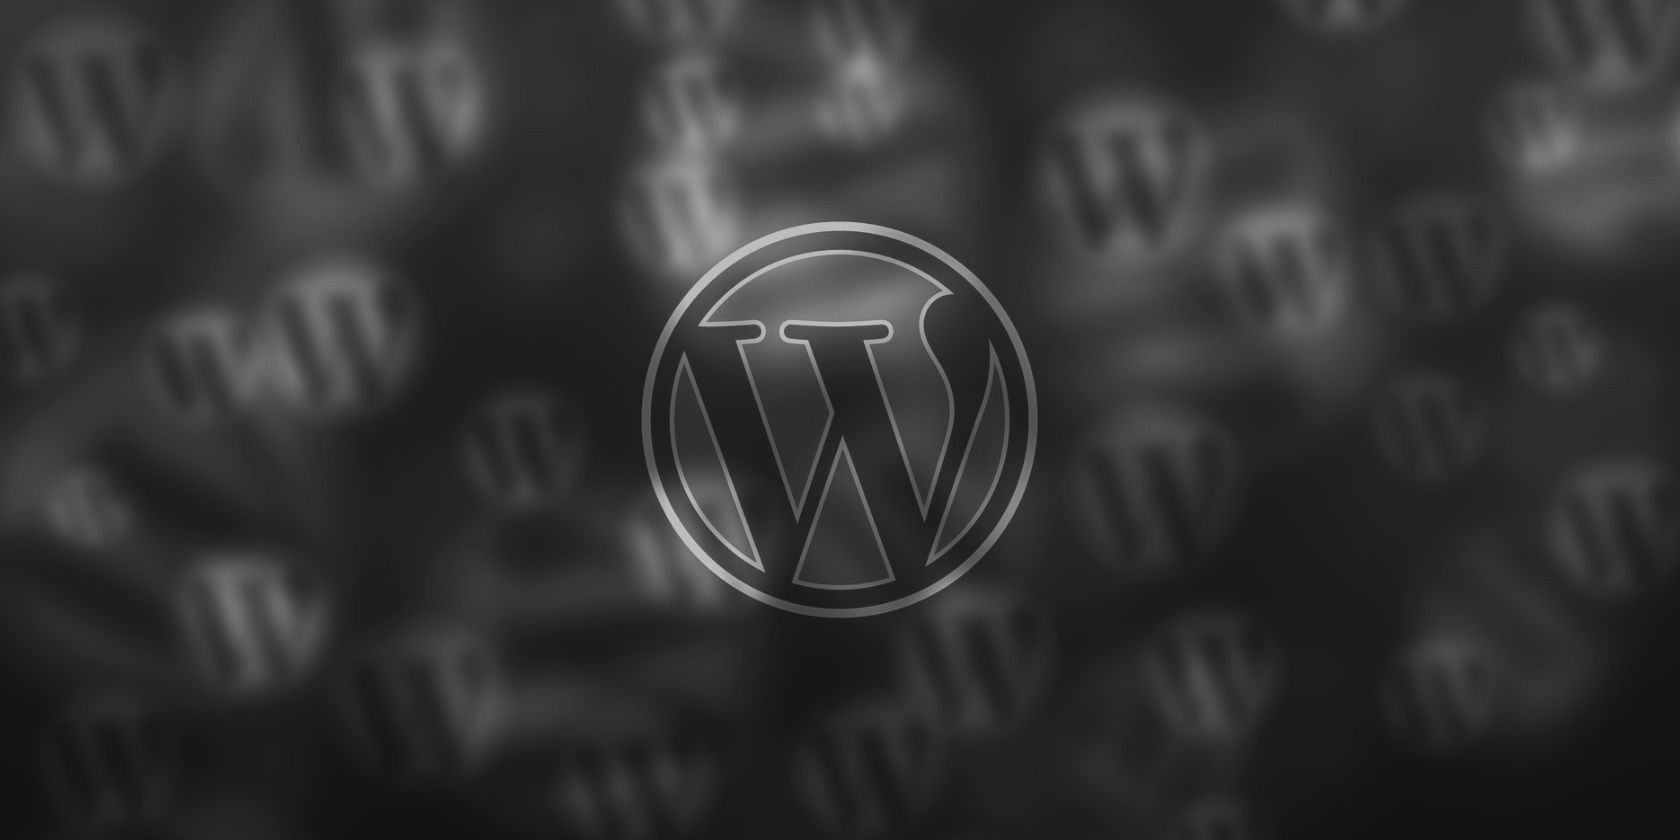 Over 15,000 WordPress Sites Affected in Malicious SEO Campaign